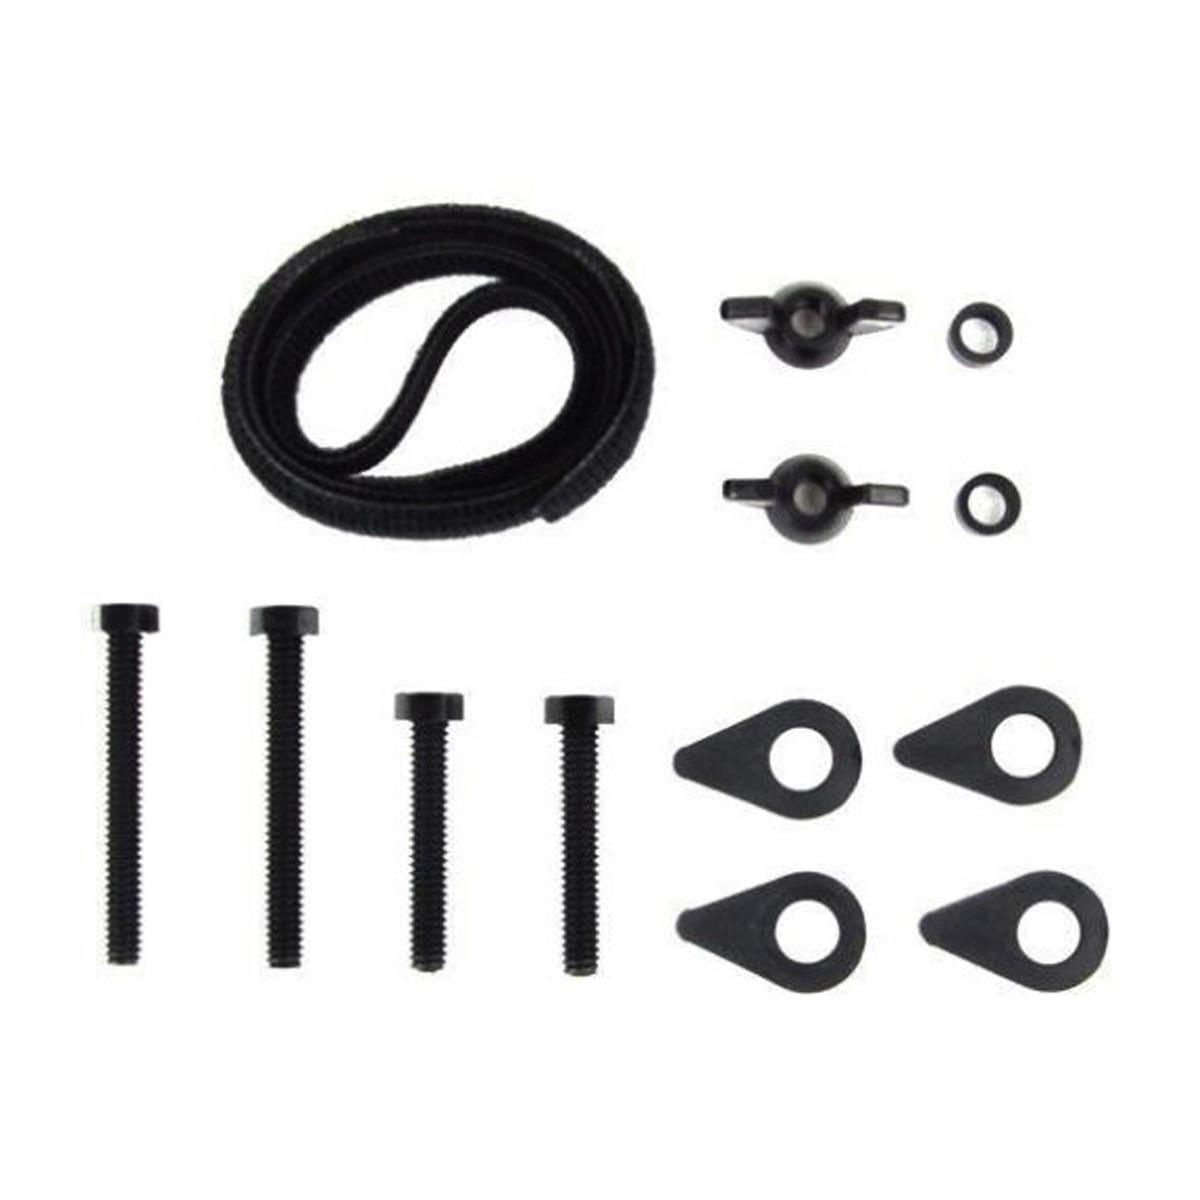 Image of Minelab Coil Wear Kit for GPX